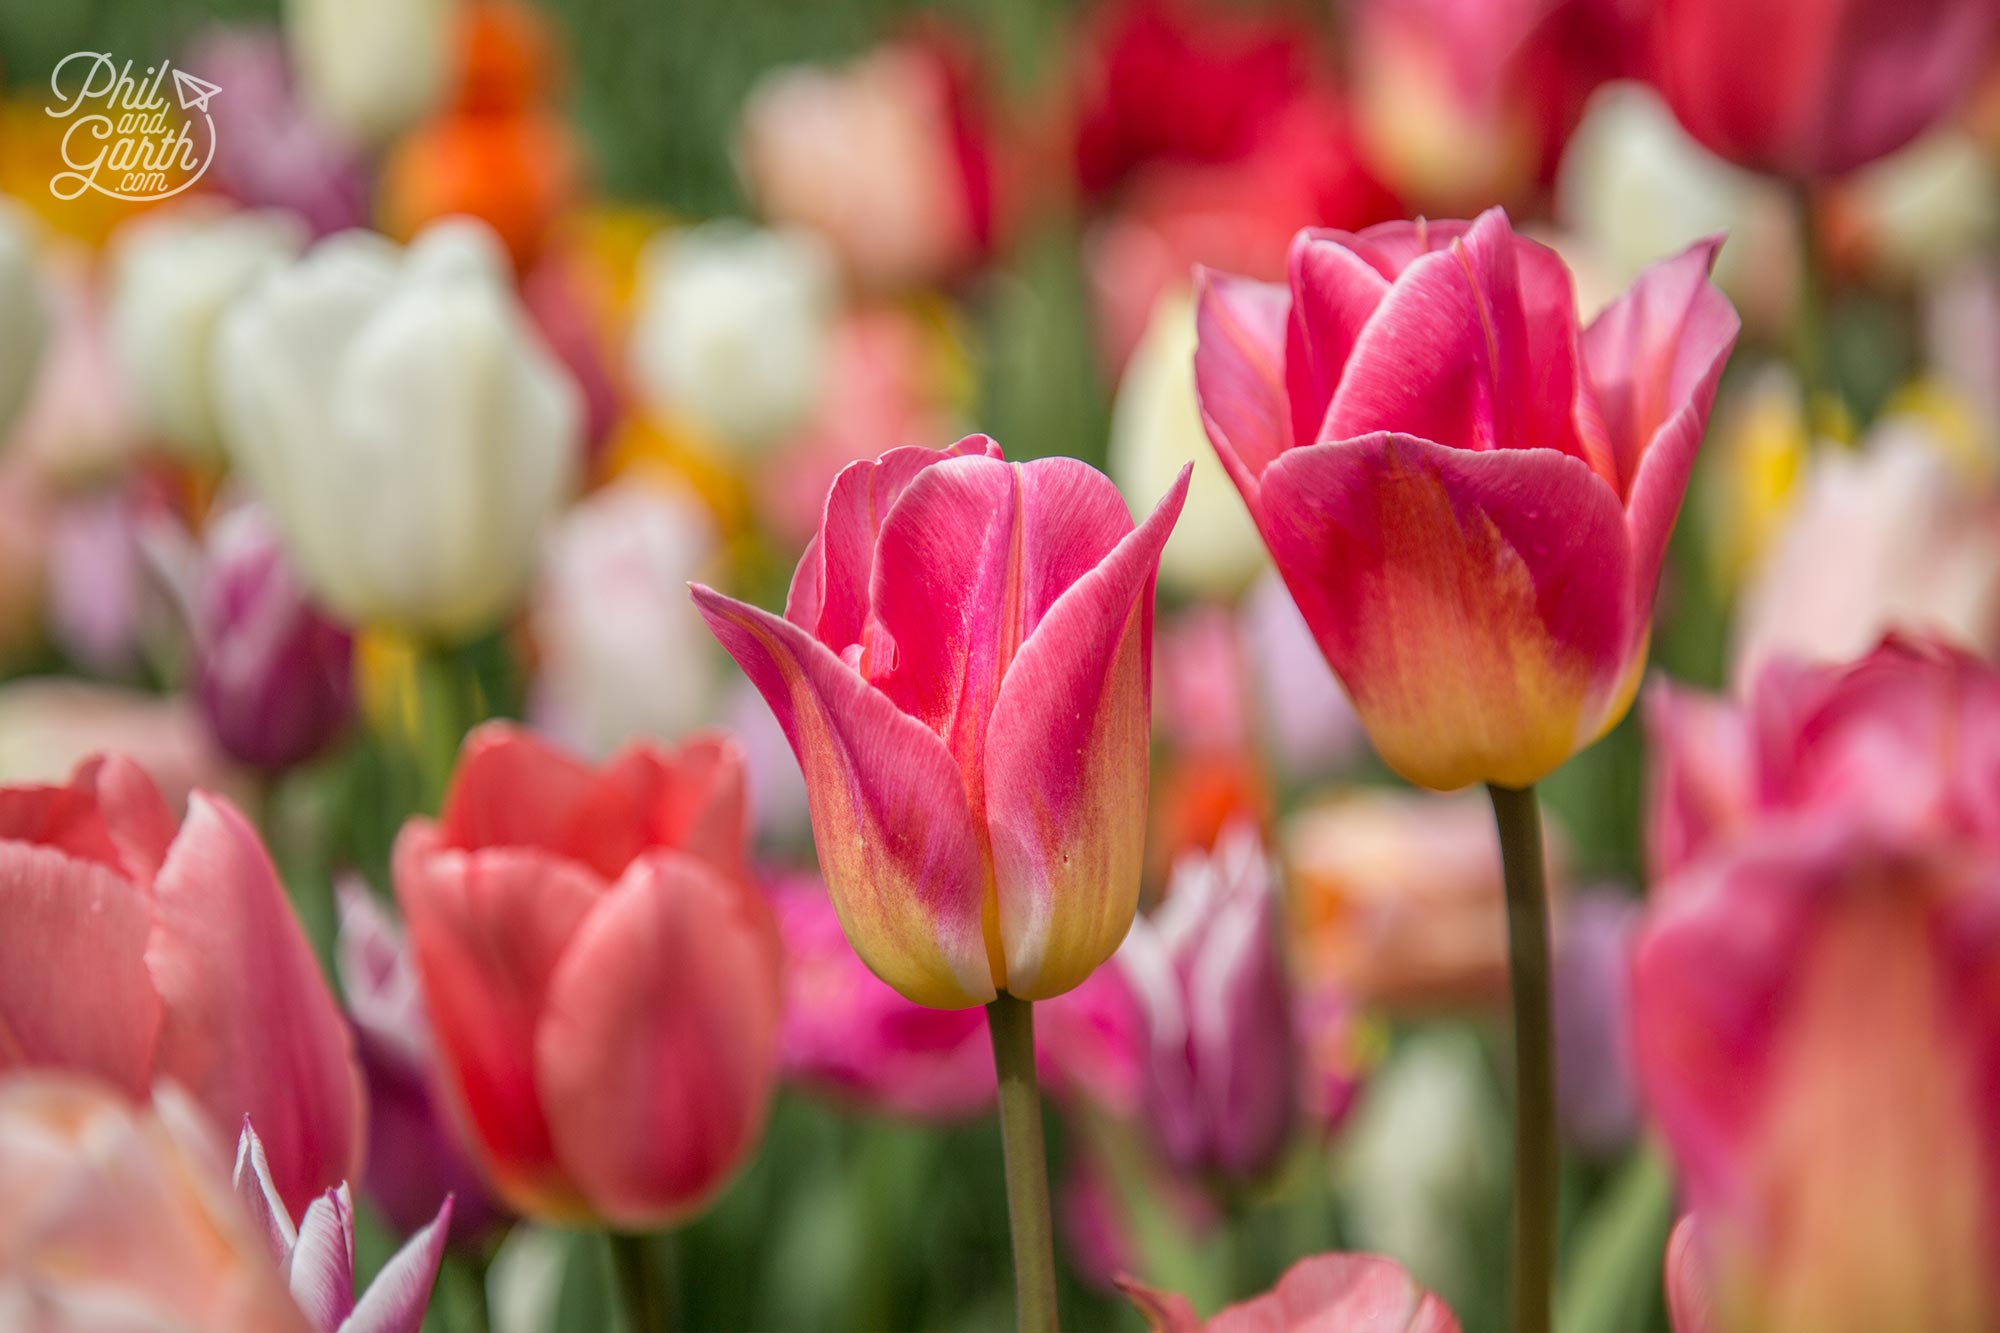 One of the best things to do is get up close to all the tulips and flowers